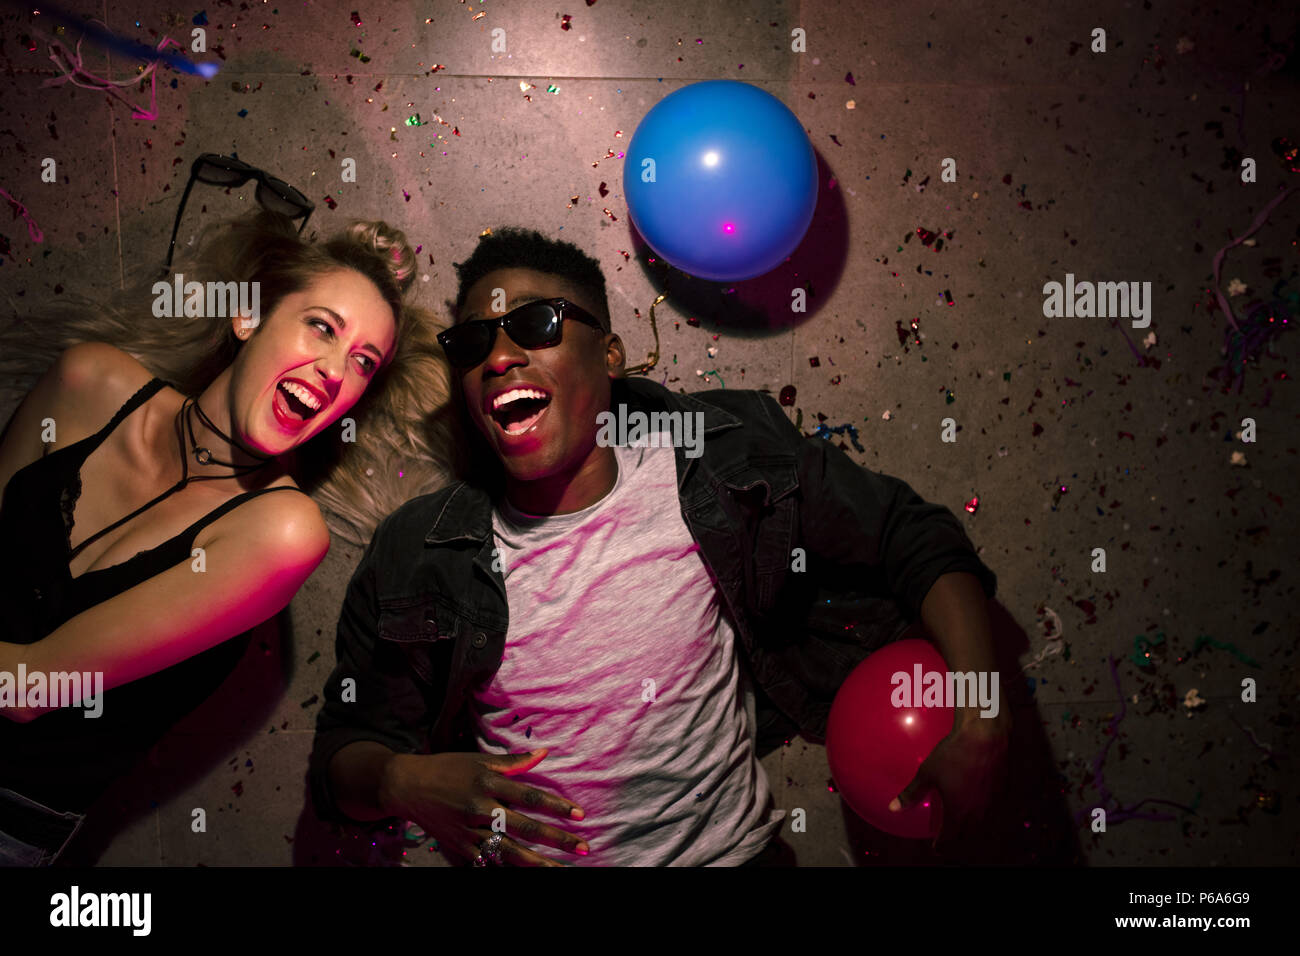 Top view of man and woman lying on floor and laughing at a house party. Friends lying on floor at the house party with balloons and confetti around. Stock Photo